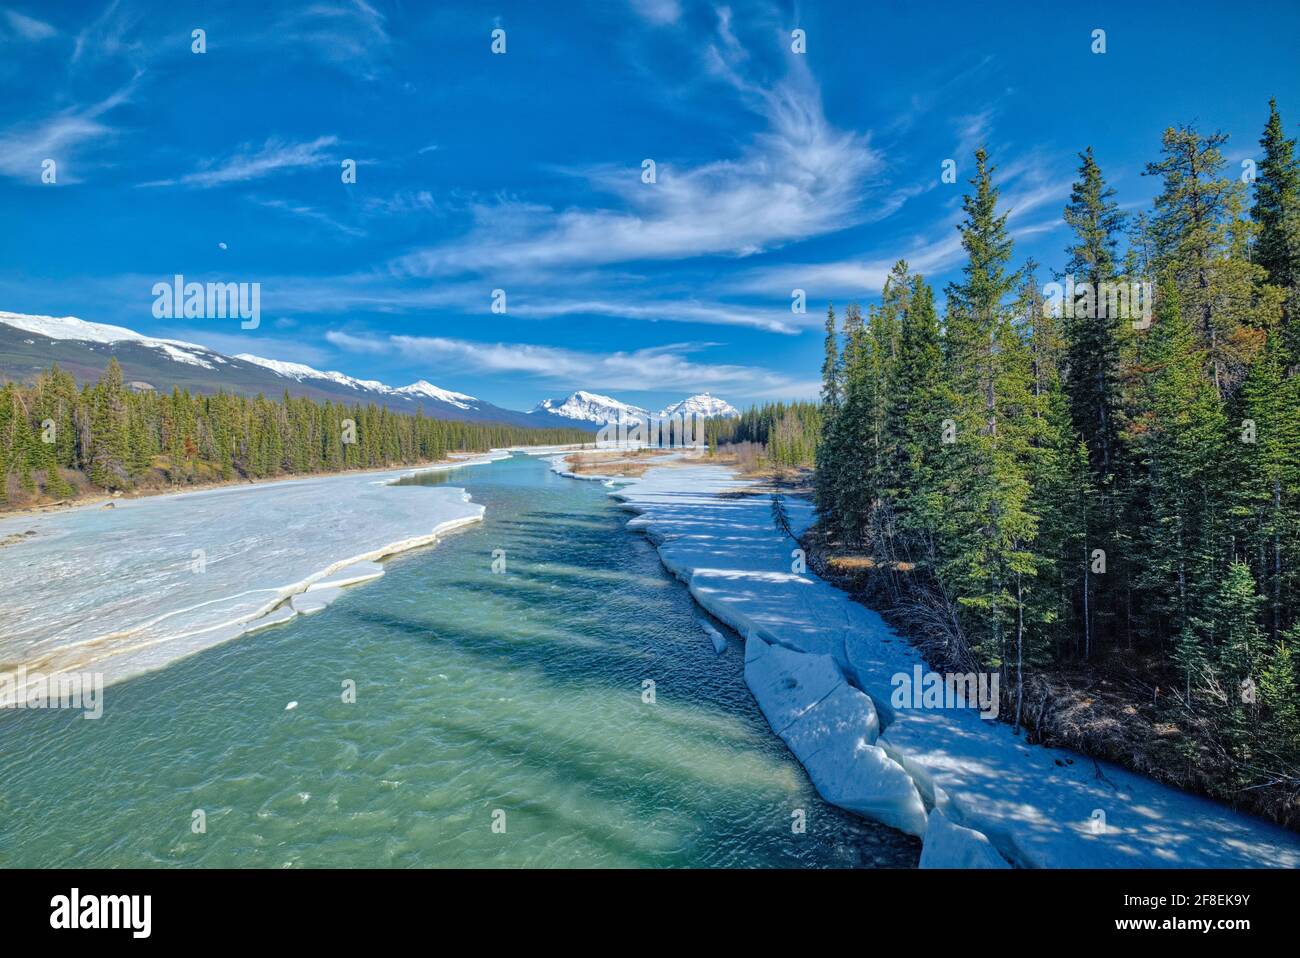 Saskatchewan River Crossing is a locality in western Alberta, Canada. It is located within Banff National Park at the junction of Highway 93 (Icefield Stock Photo